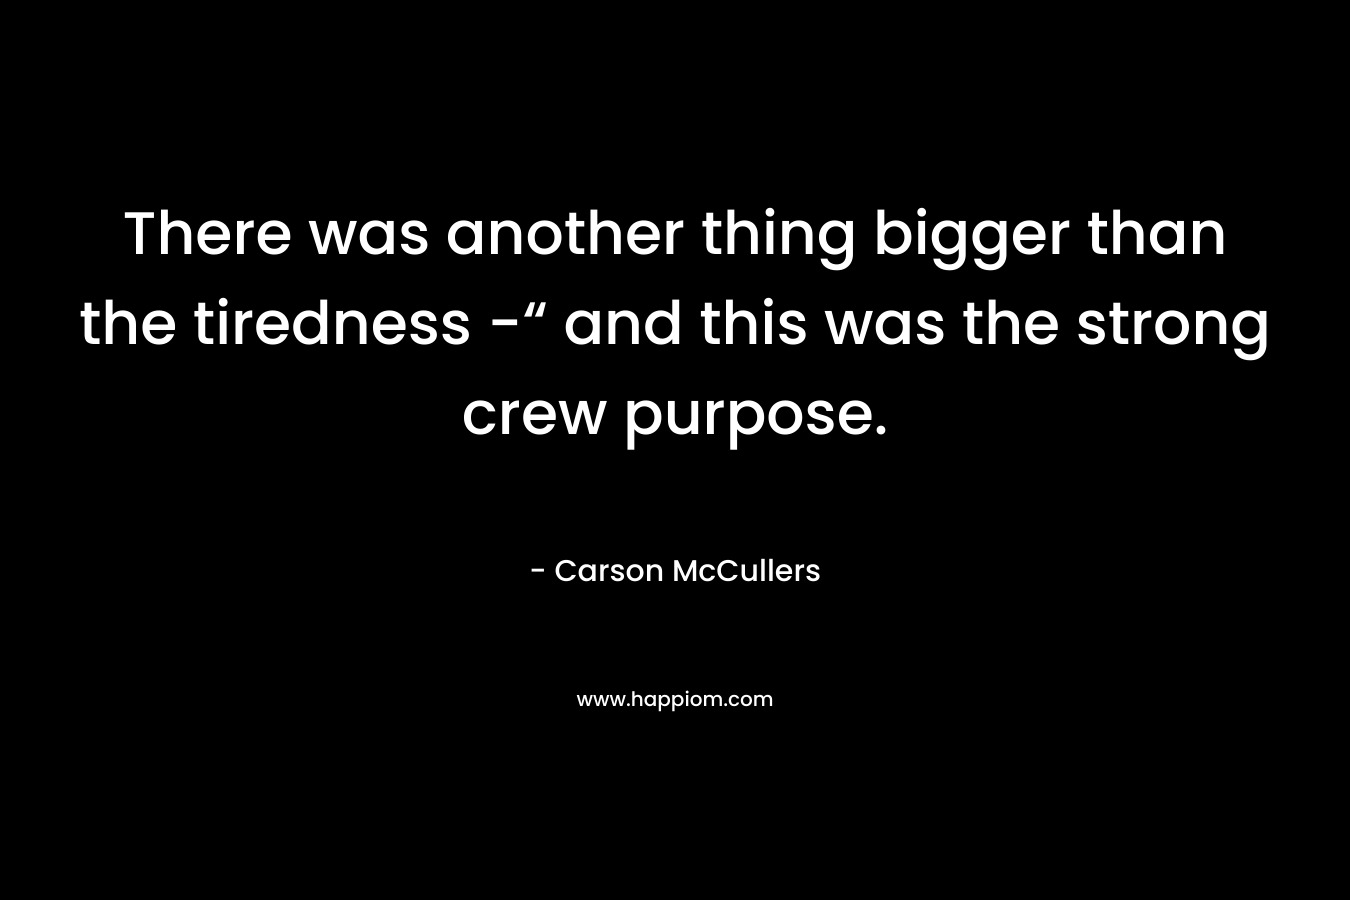 There was another thing bigger than the tiredness -“ and this was the strong crew purpose.